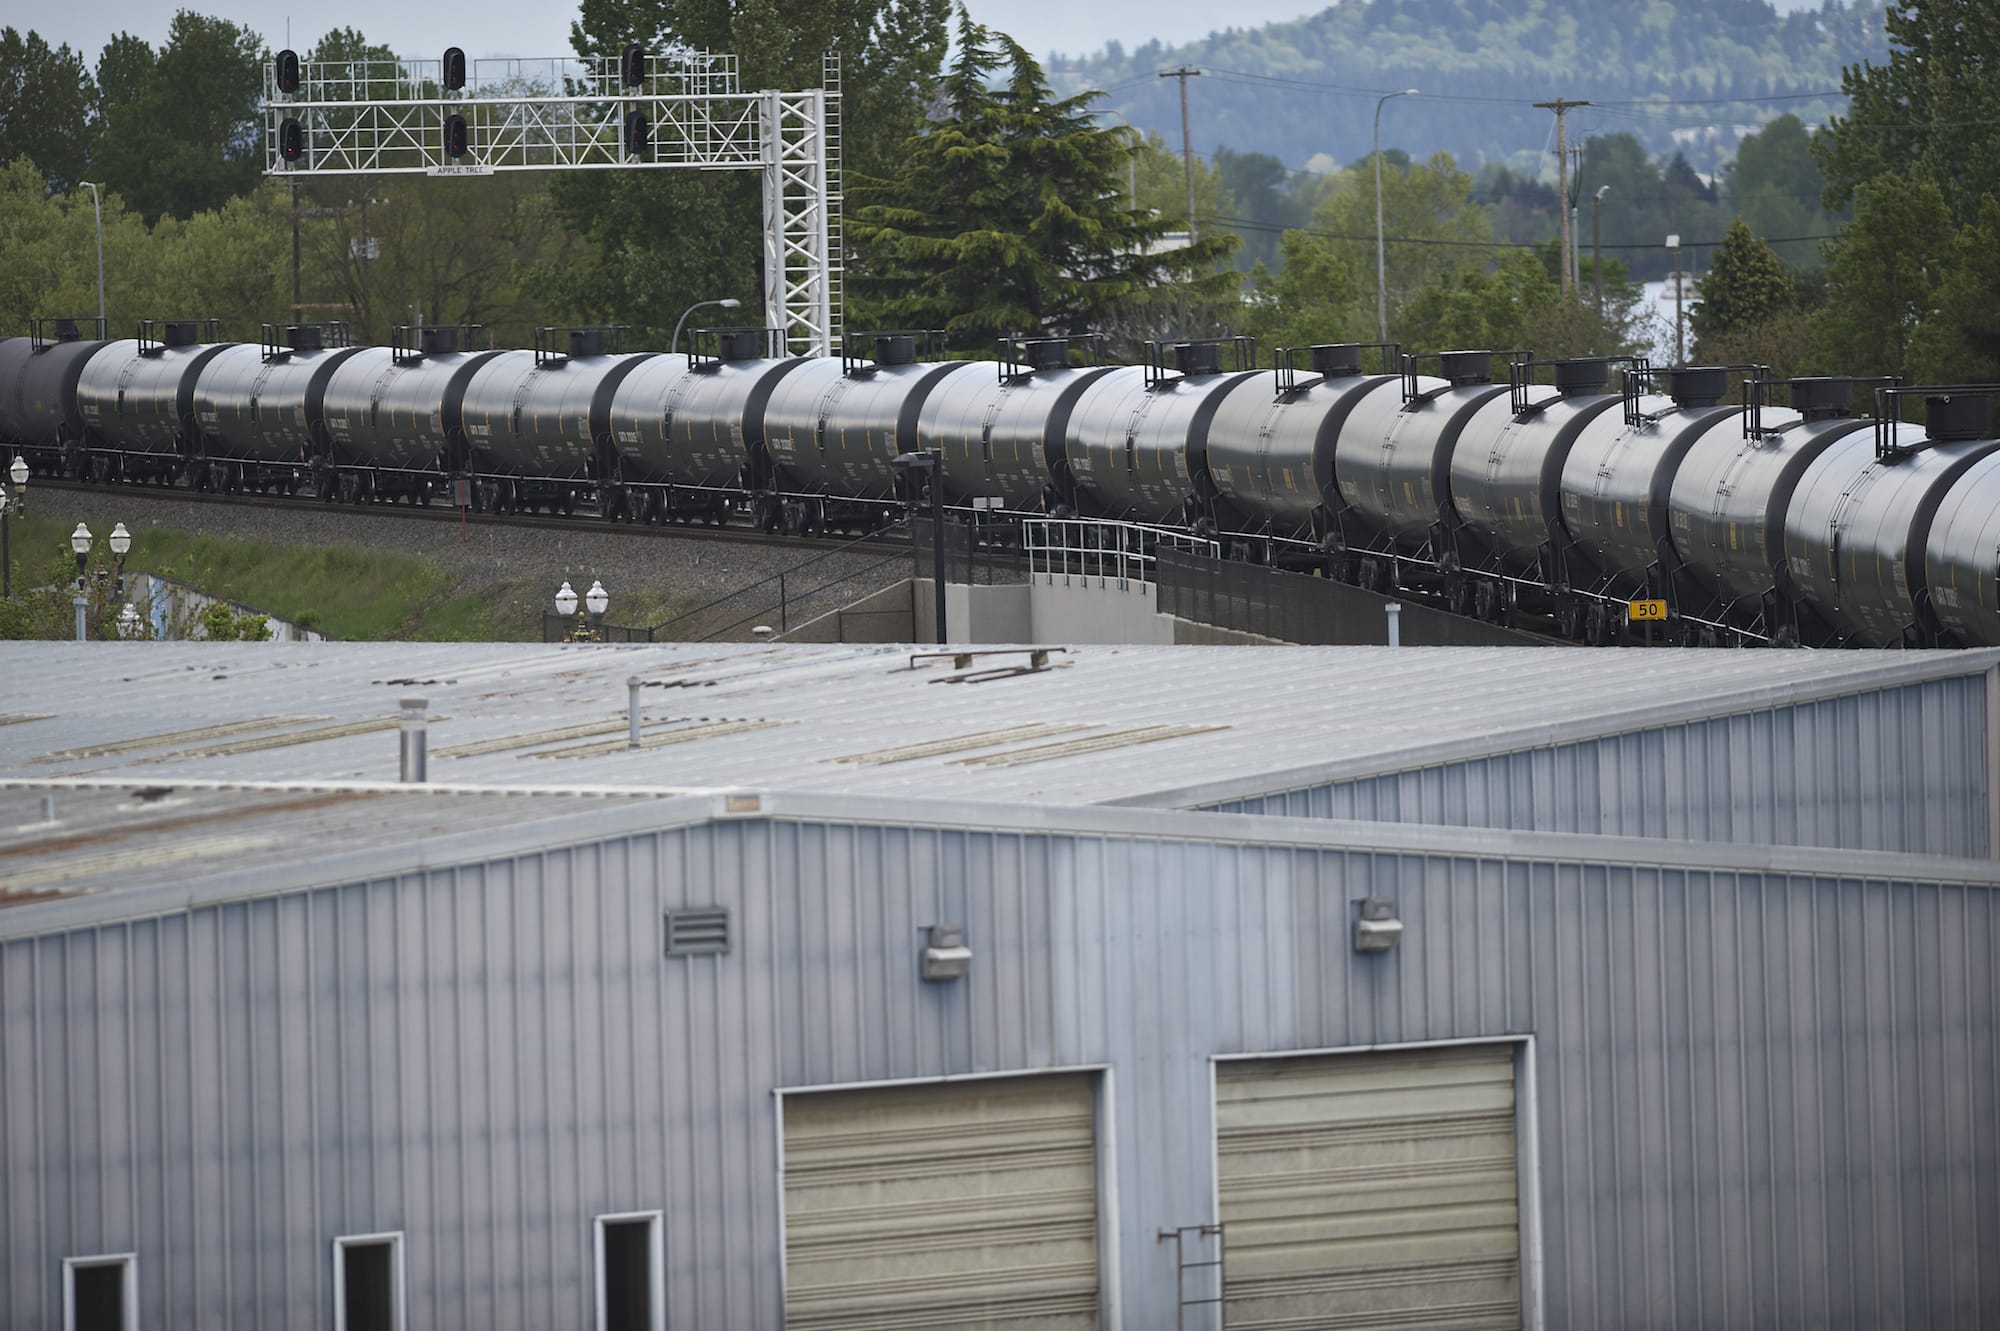 In Washingto, nearly 17 million barrels of oil were hauled across the state by rail in 2013 alone, according to the state Department of Ecology. That's up roughly 40 percent in one year.